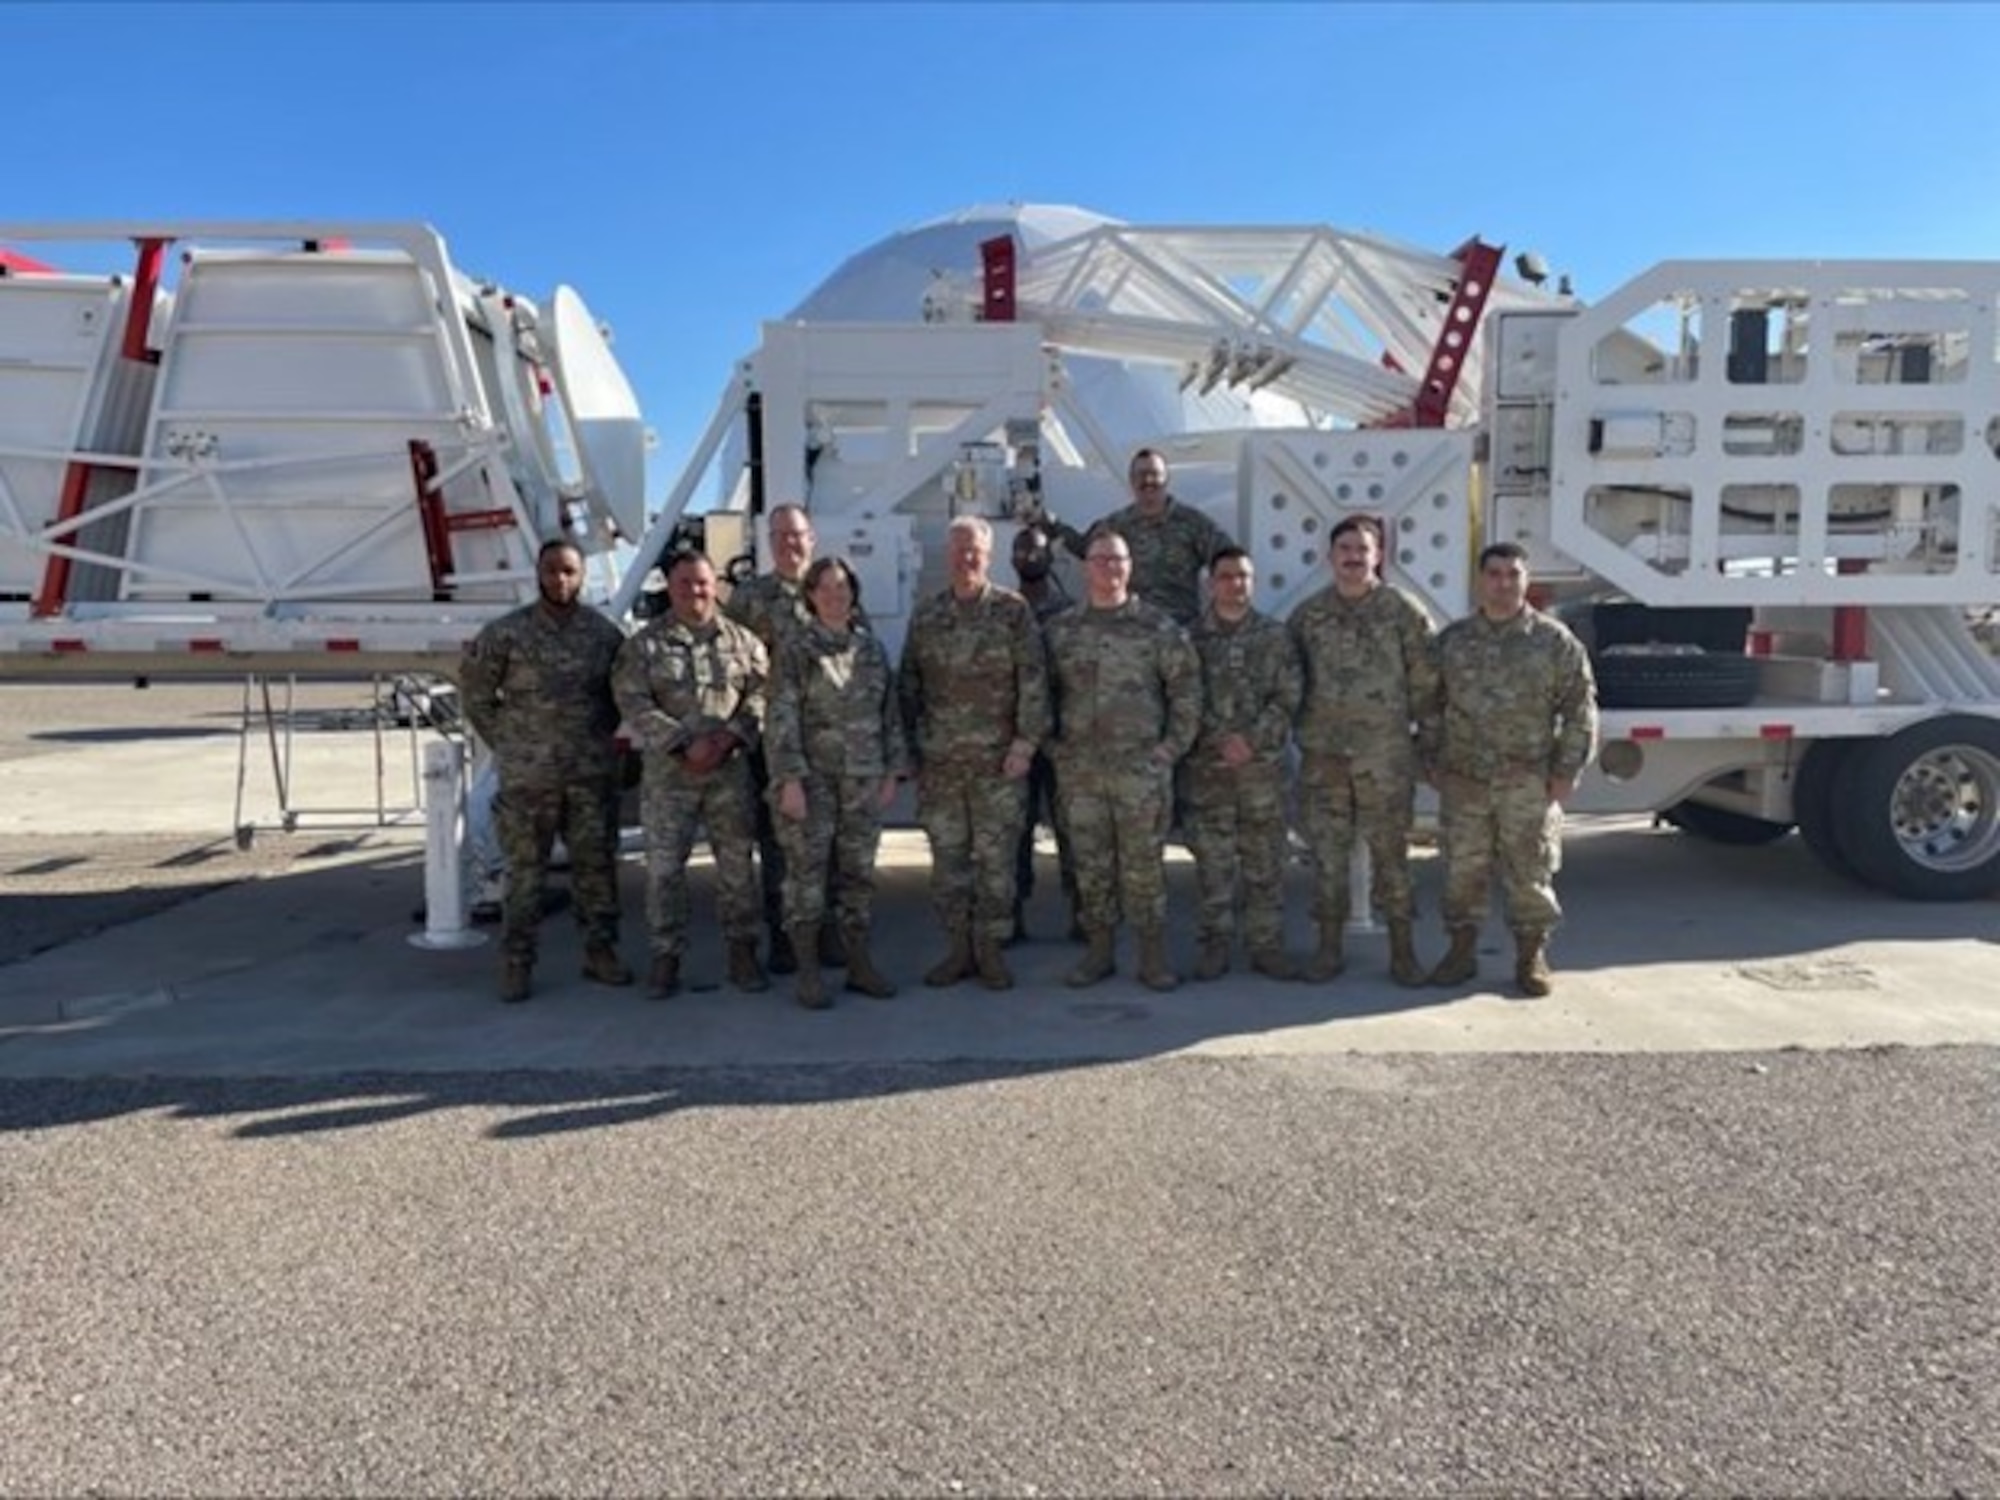 Space Systems Command’s Commander, Lt. Gen. Philip Garrant and Deputy Commander, Col. Michelle Idle, at Kirtland Air Force Base, NM, home of SSC Innovation & Prototyping and more.